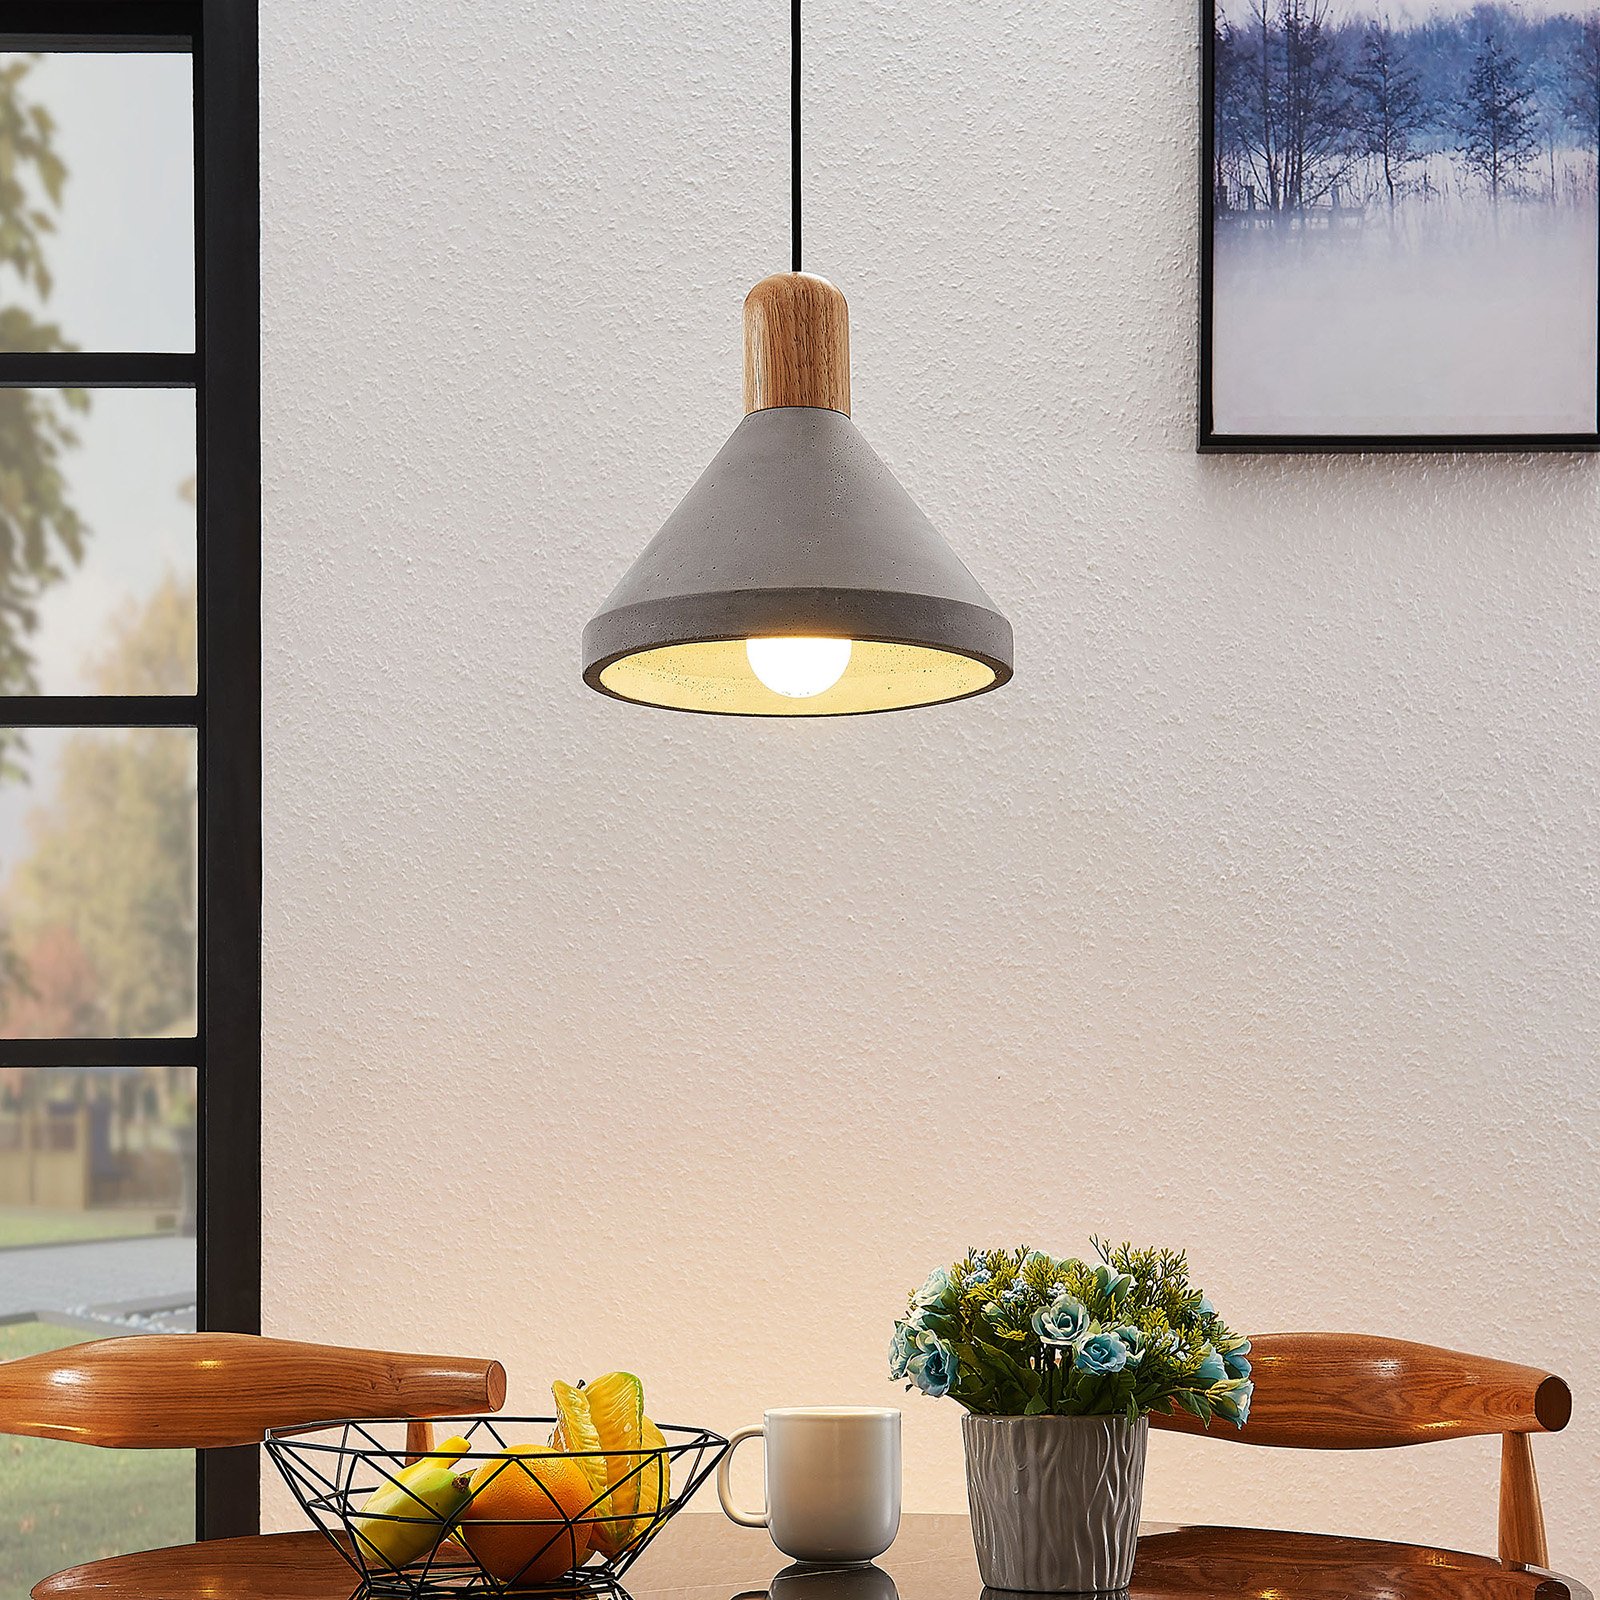 Concrete pendant light Caisy with wood, round